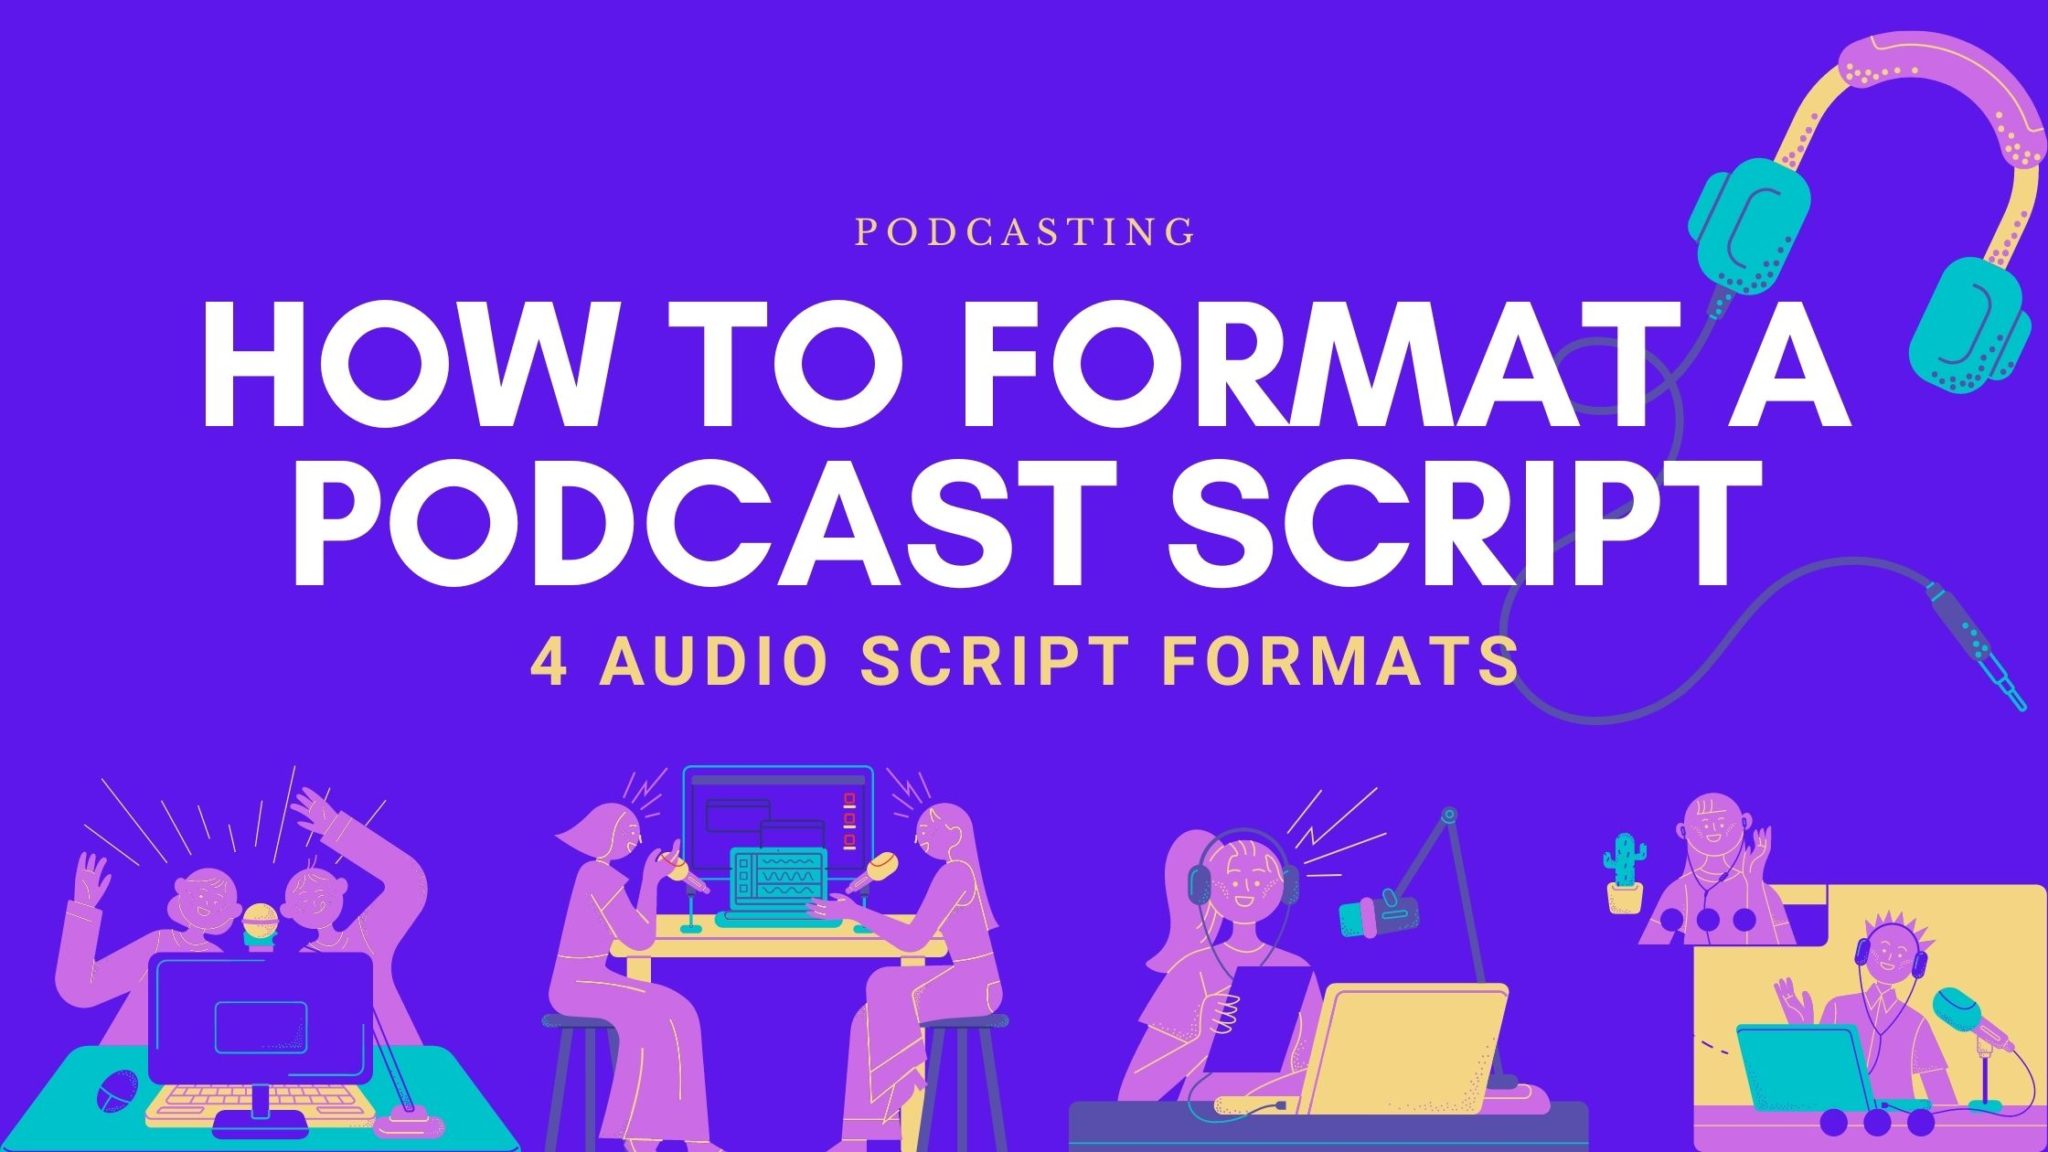 How to Write a Podcast: 24 Ways to Format a Podcast Script